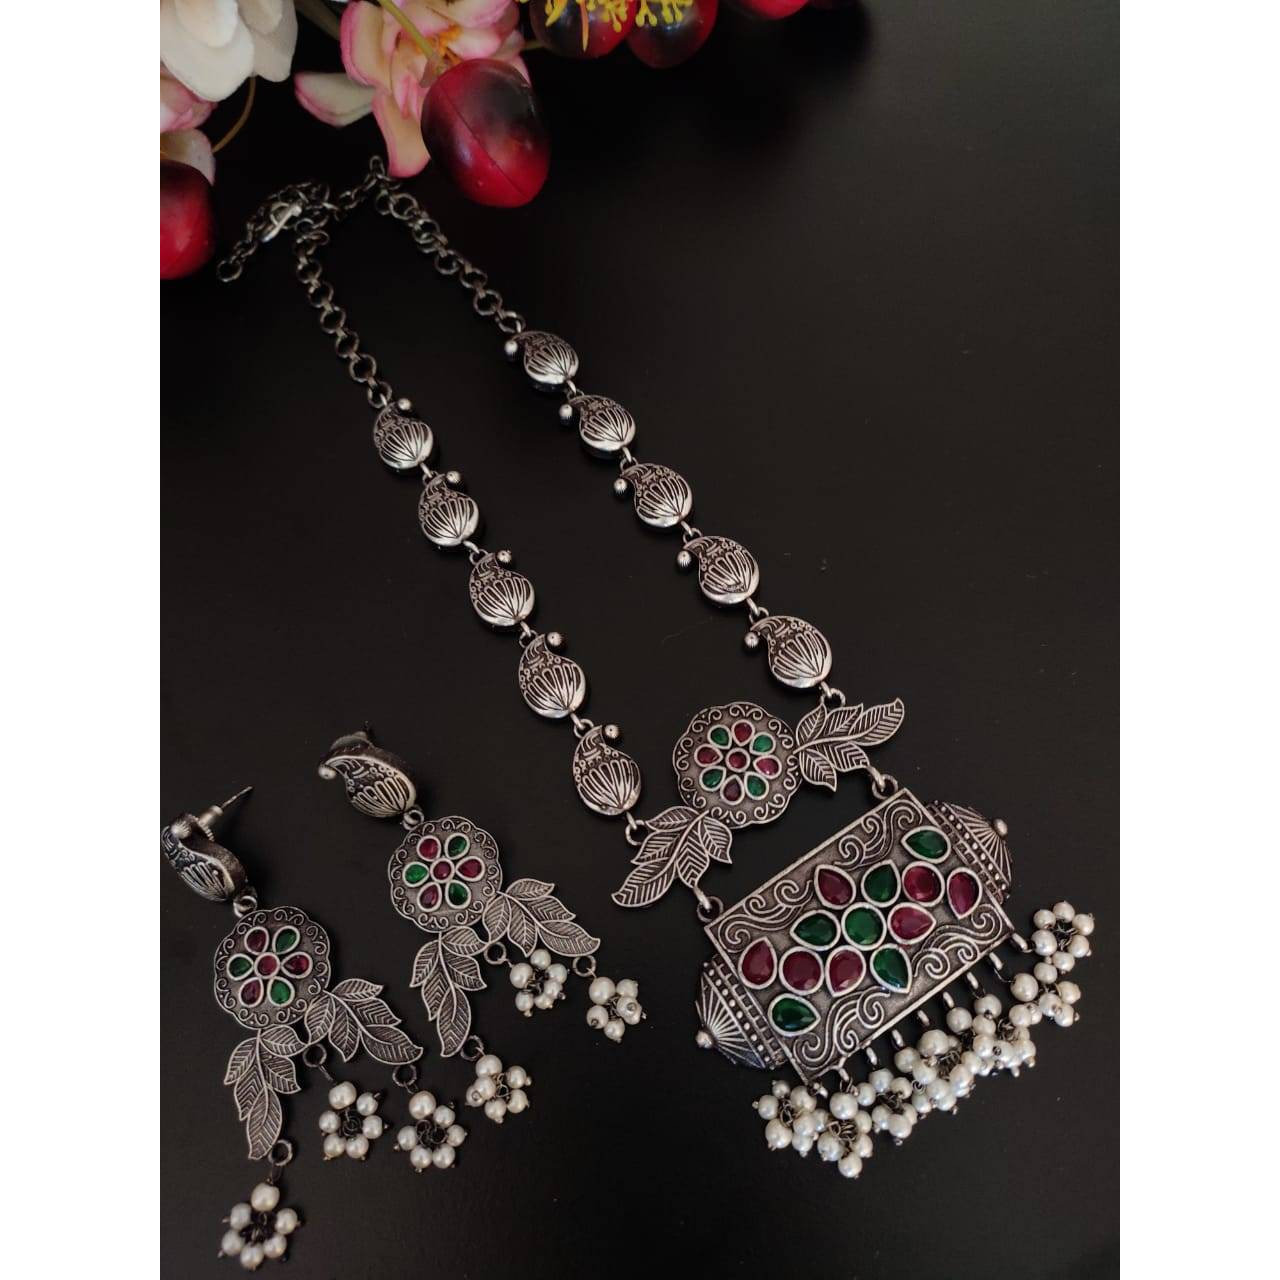 Silver look long necklace set, Indian jewelery, temple jewelry, gifts for her, Bollywood jewellery, antique necklace, Handmade, German silve